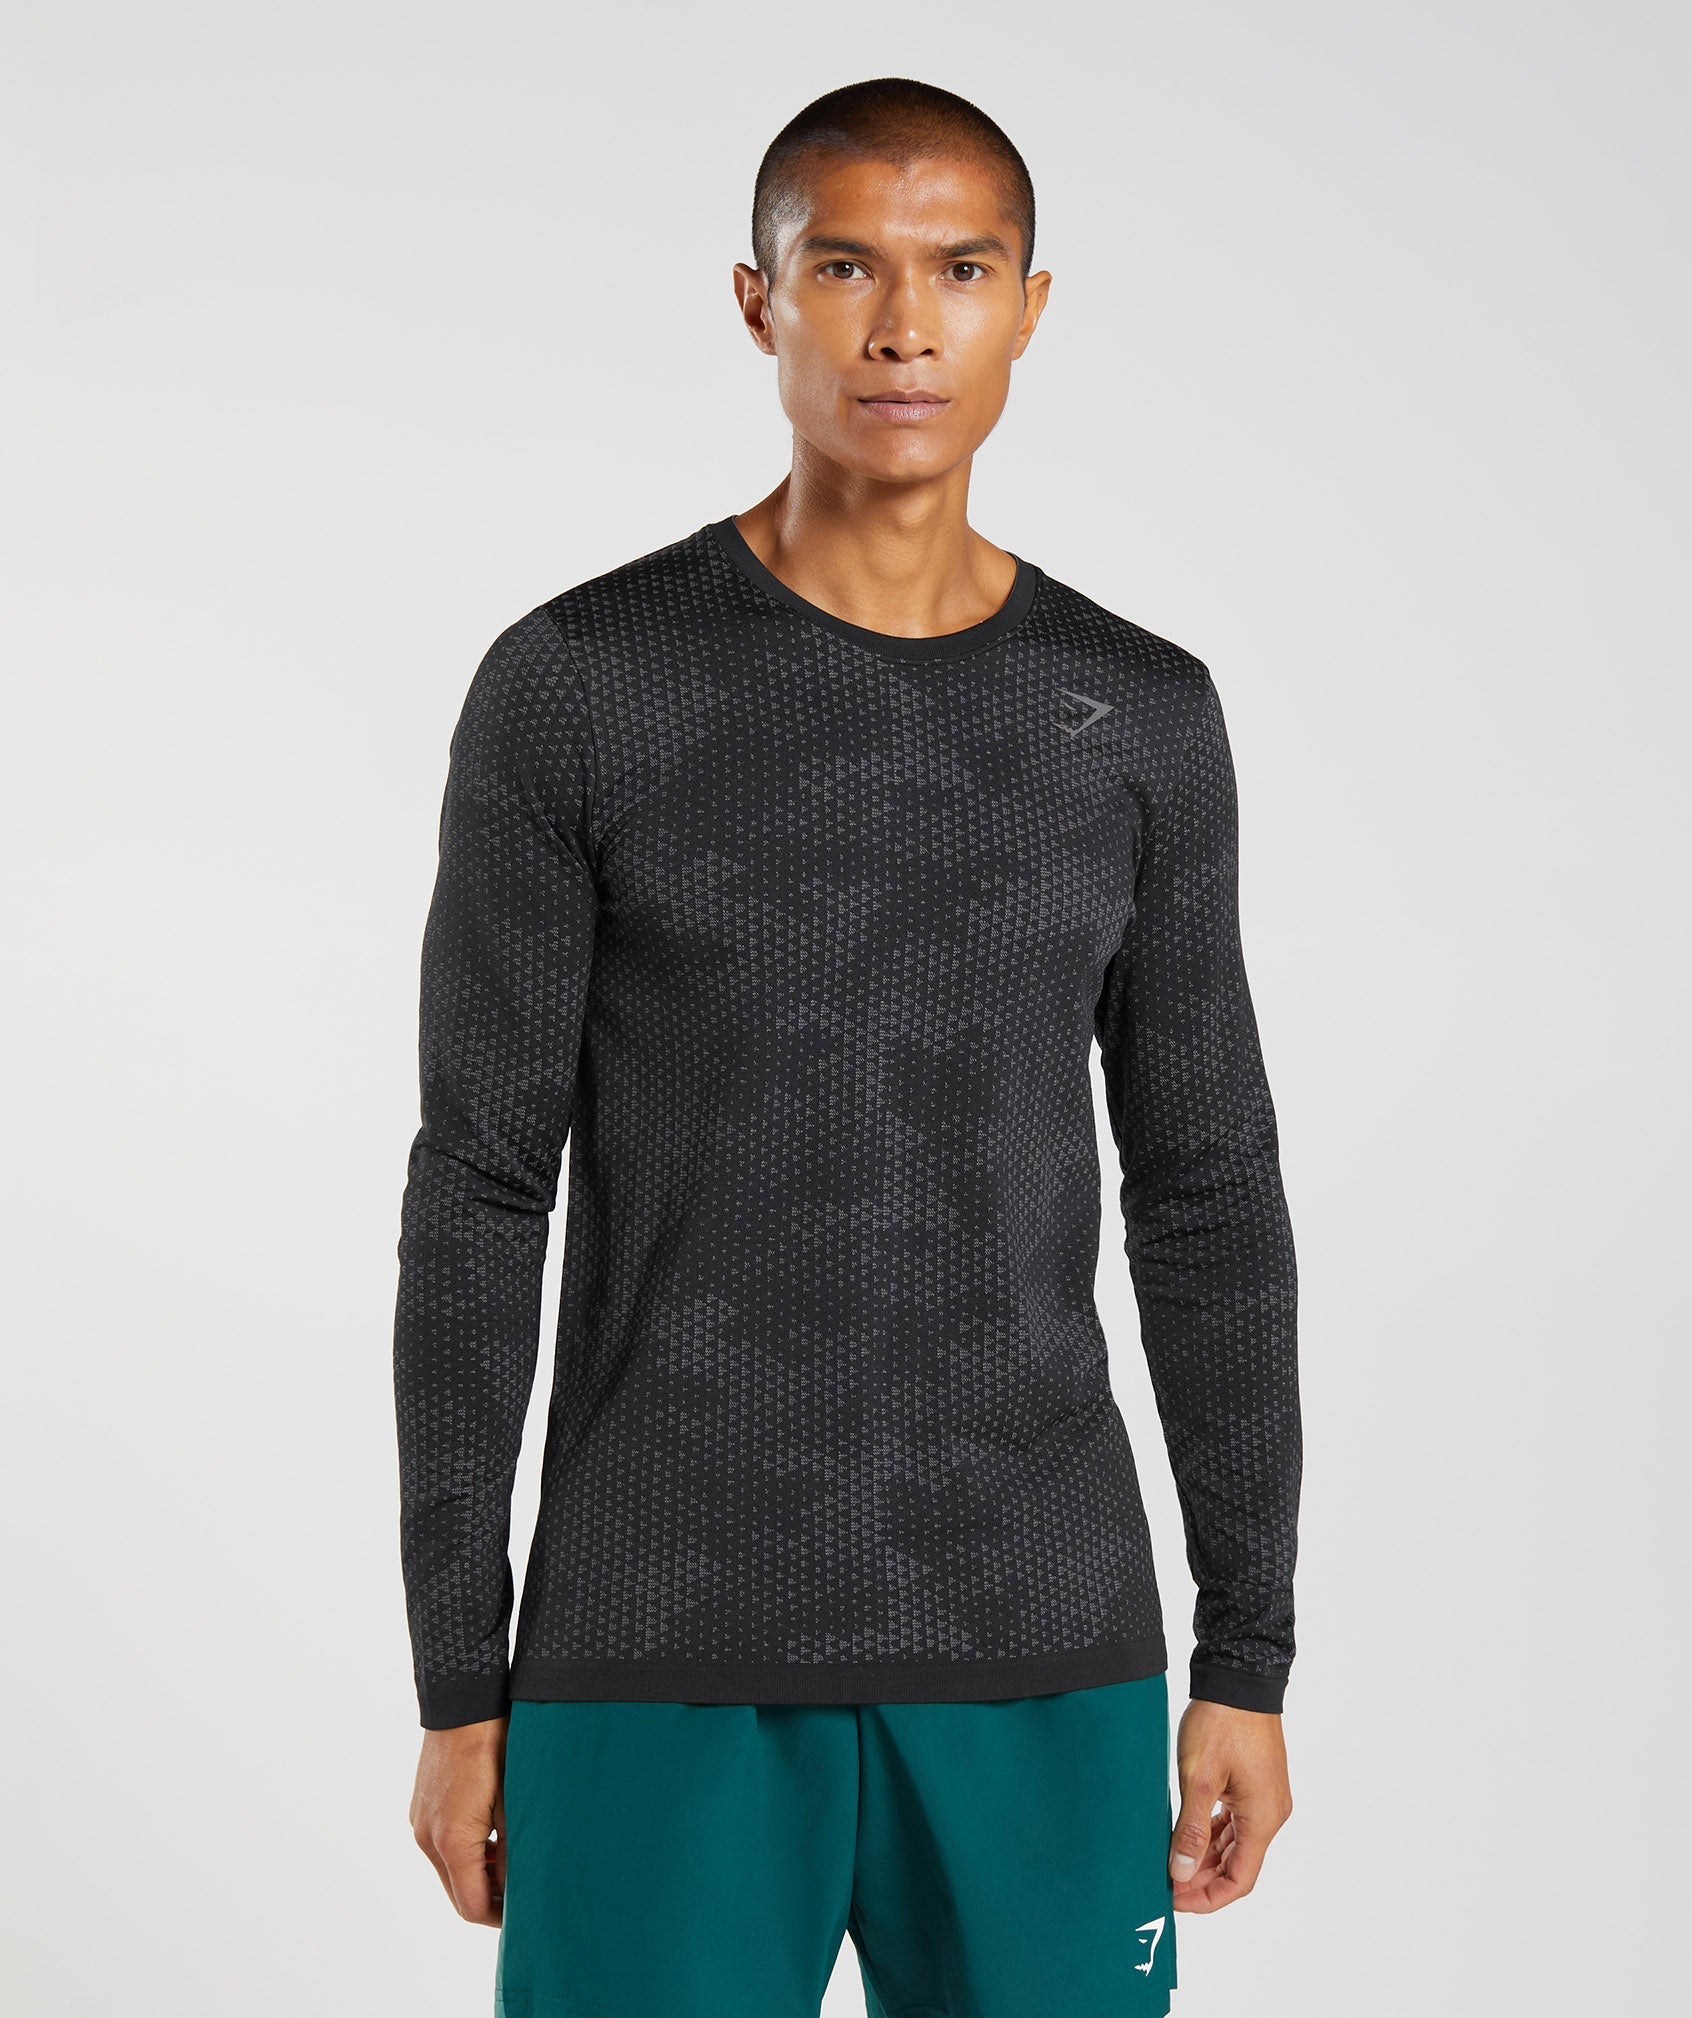 Long Sleeve Sports Tops, Gym & Running Tops